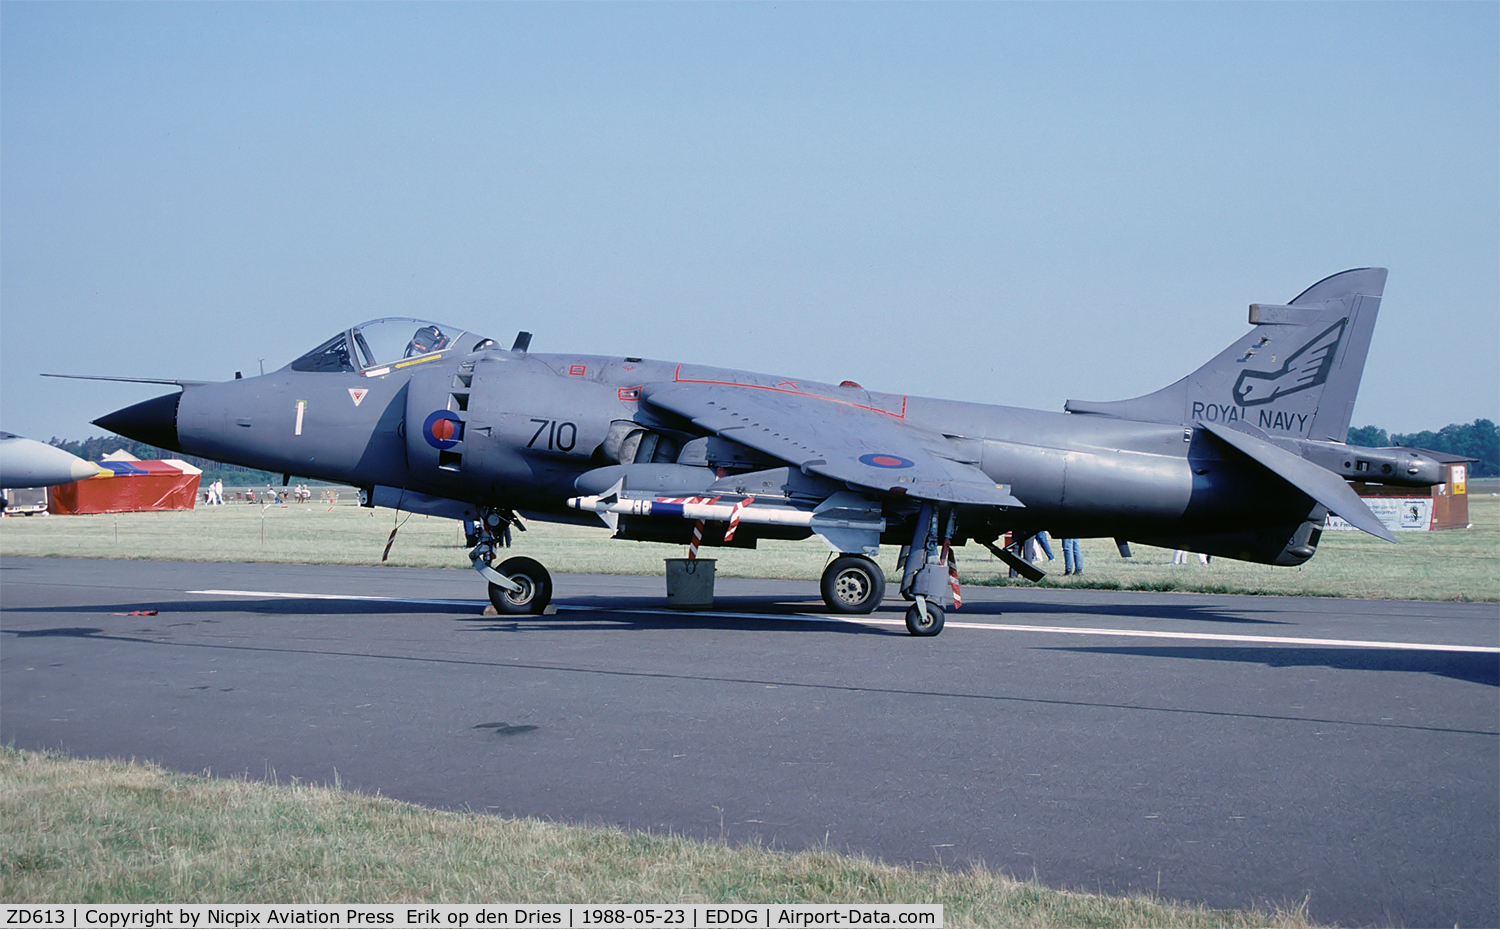 ZD613, 1985 British Aerospace Sea Harrier FRS.1 C/N 41H-912052/B46/P16, Sea Harriers, like this ZD613,  were rarely seen; even during Open Houses, so this one was a pleasent surprise!